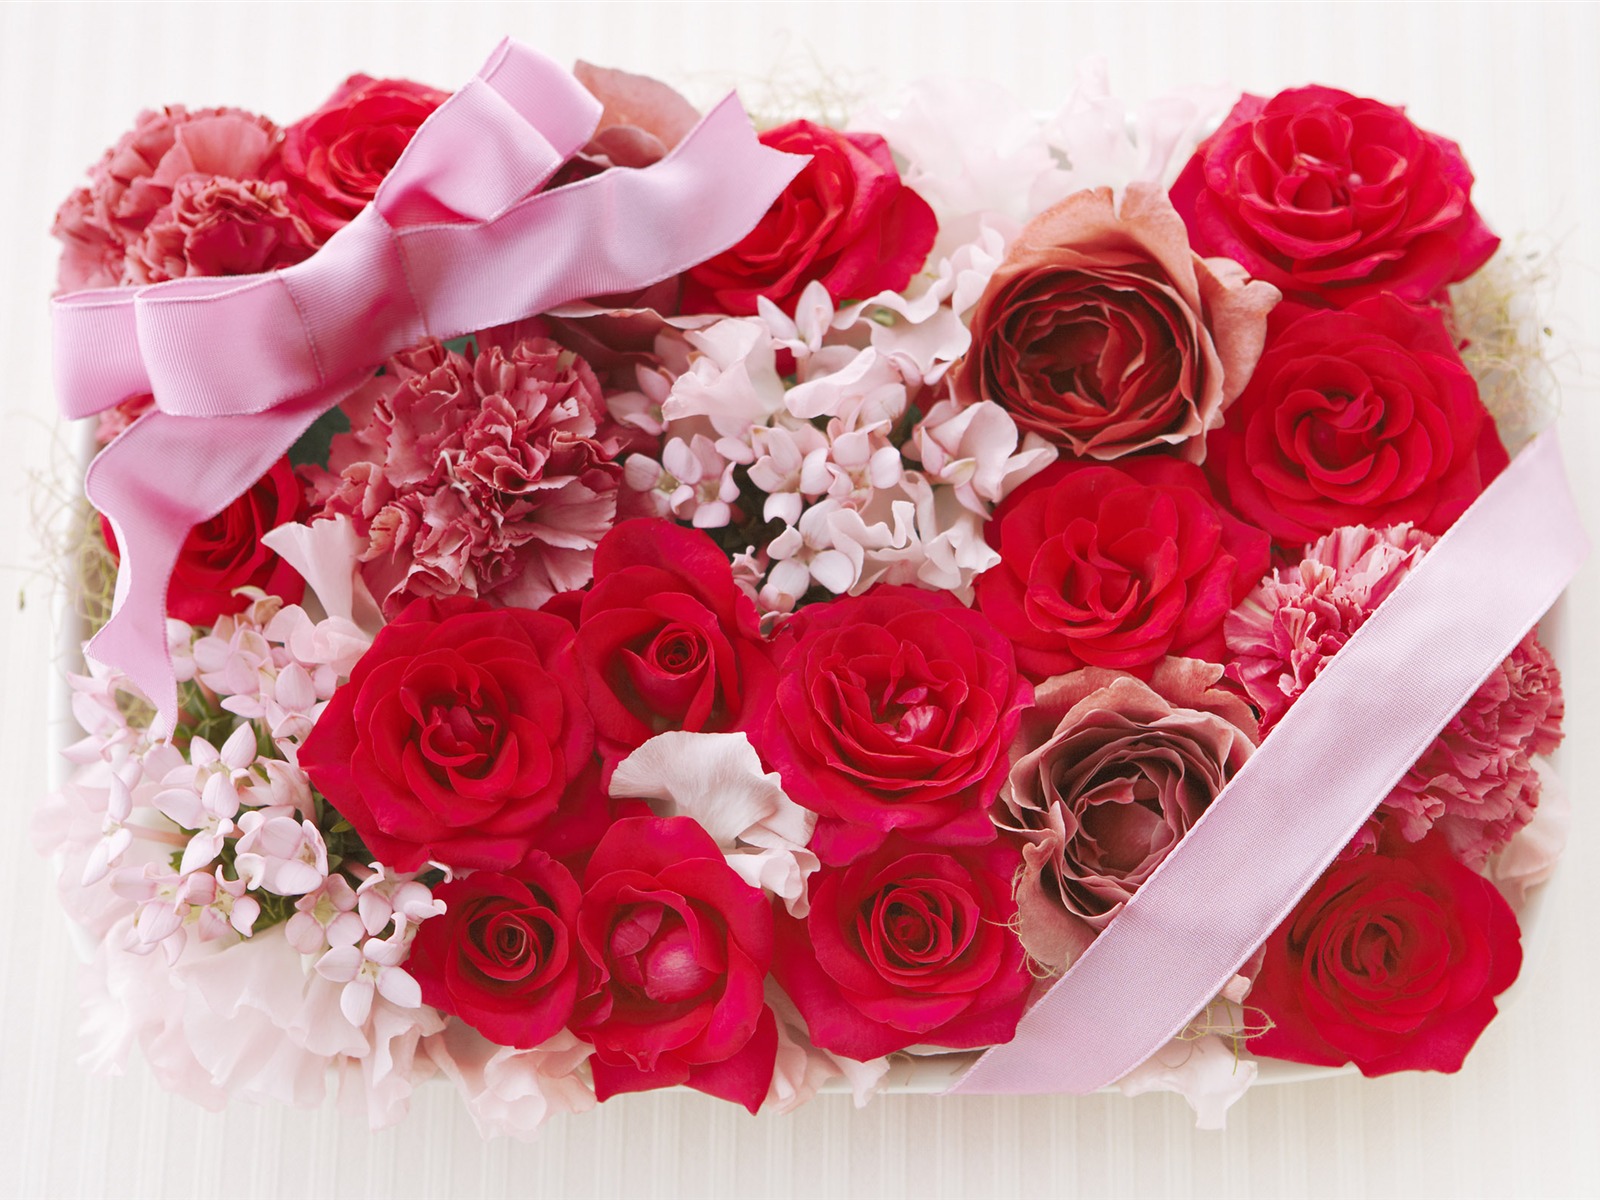 Flowers Gifts HD Wallpapers (1) #18 - 1600x1200